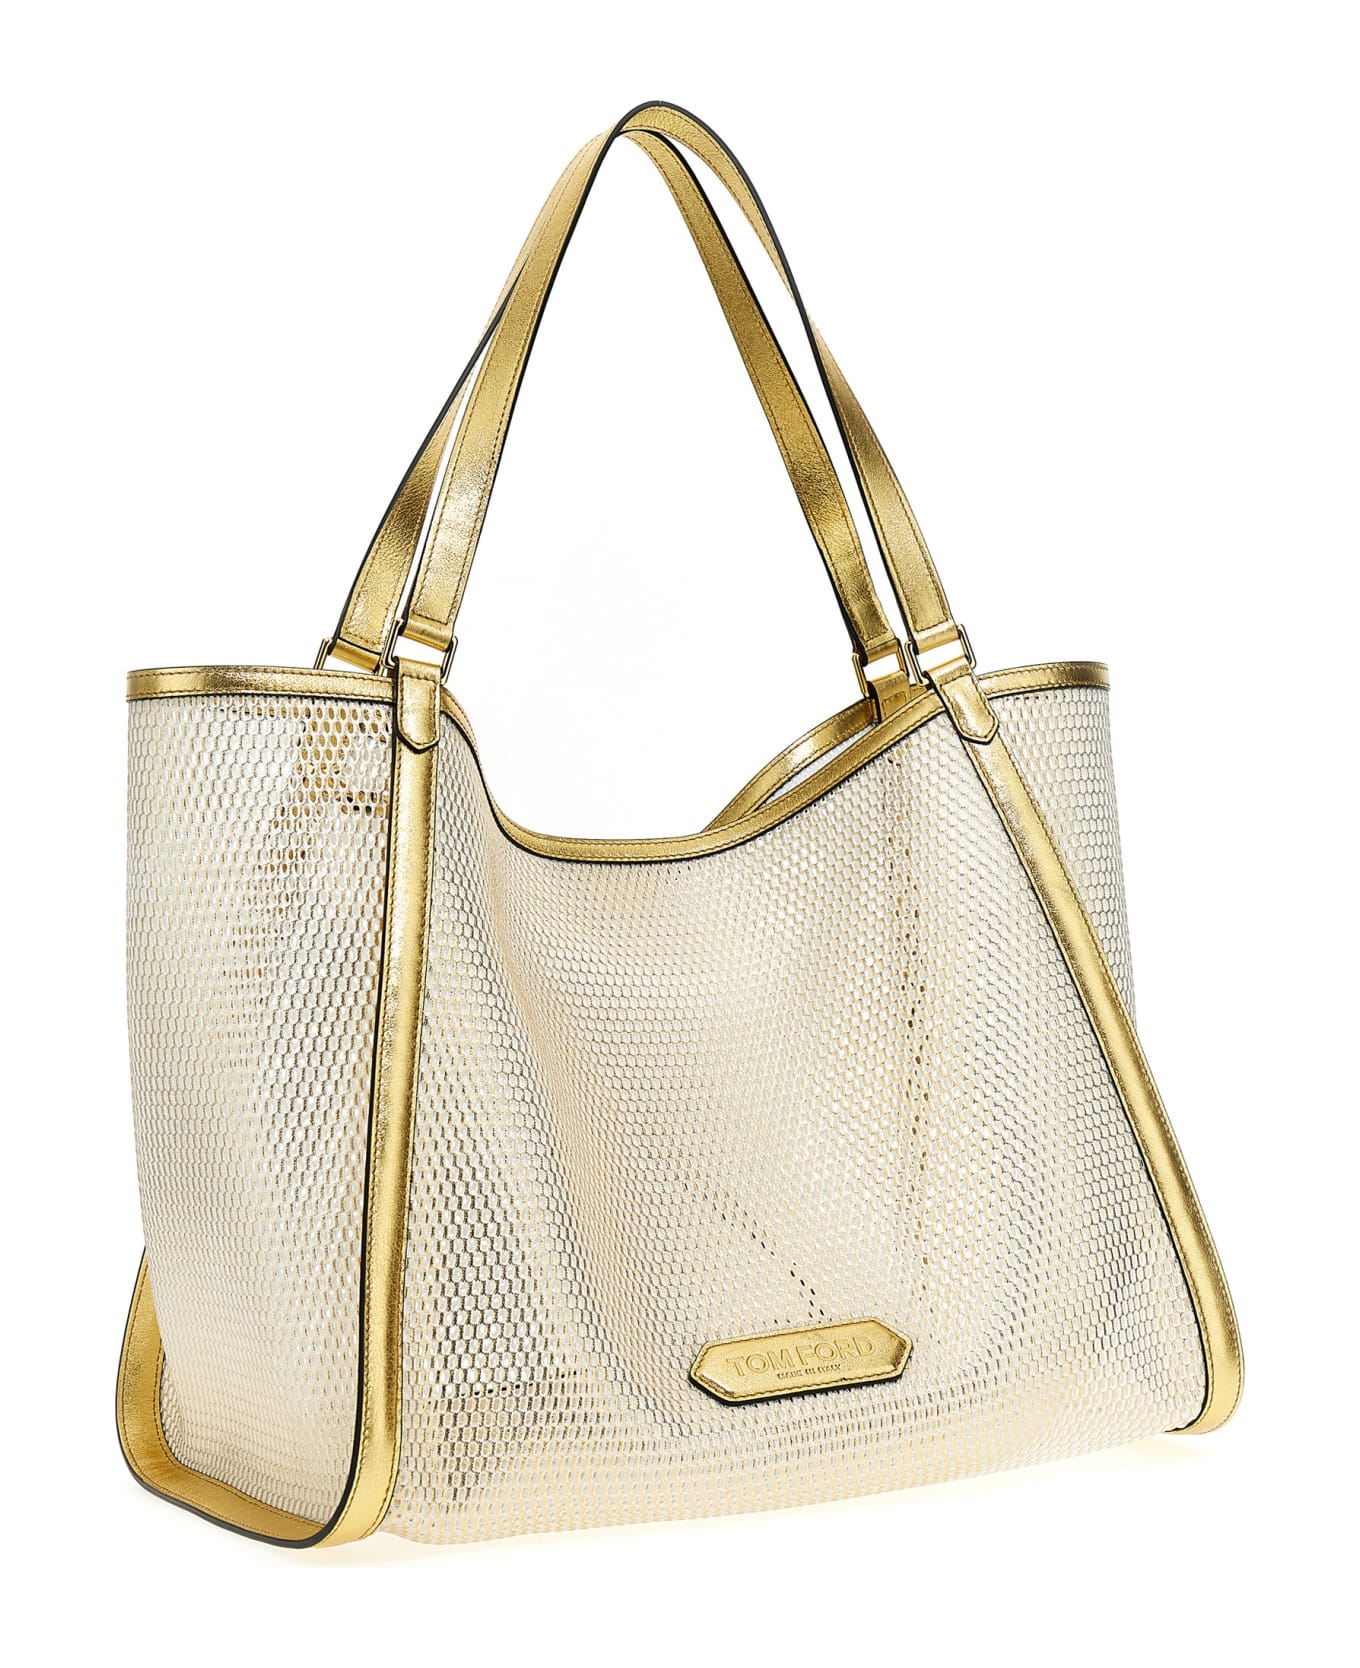 Tom Ford Laminated Leather Mesh Shopping Bag - Gold